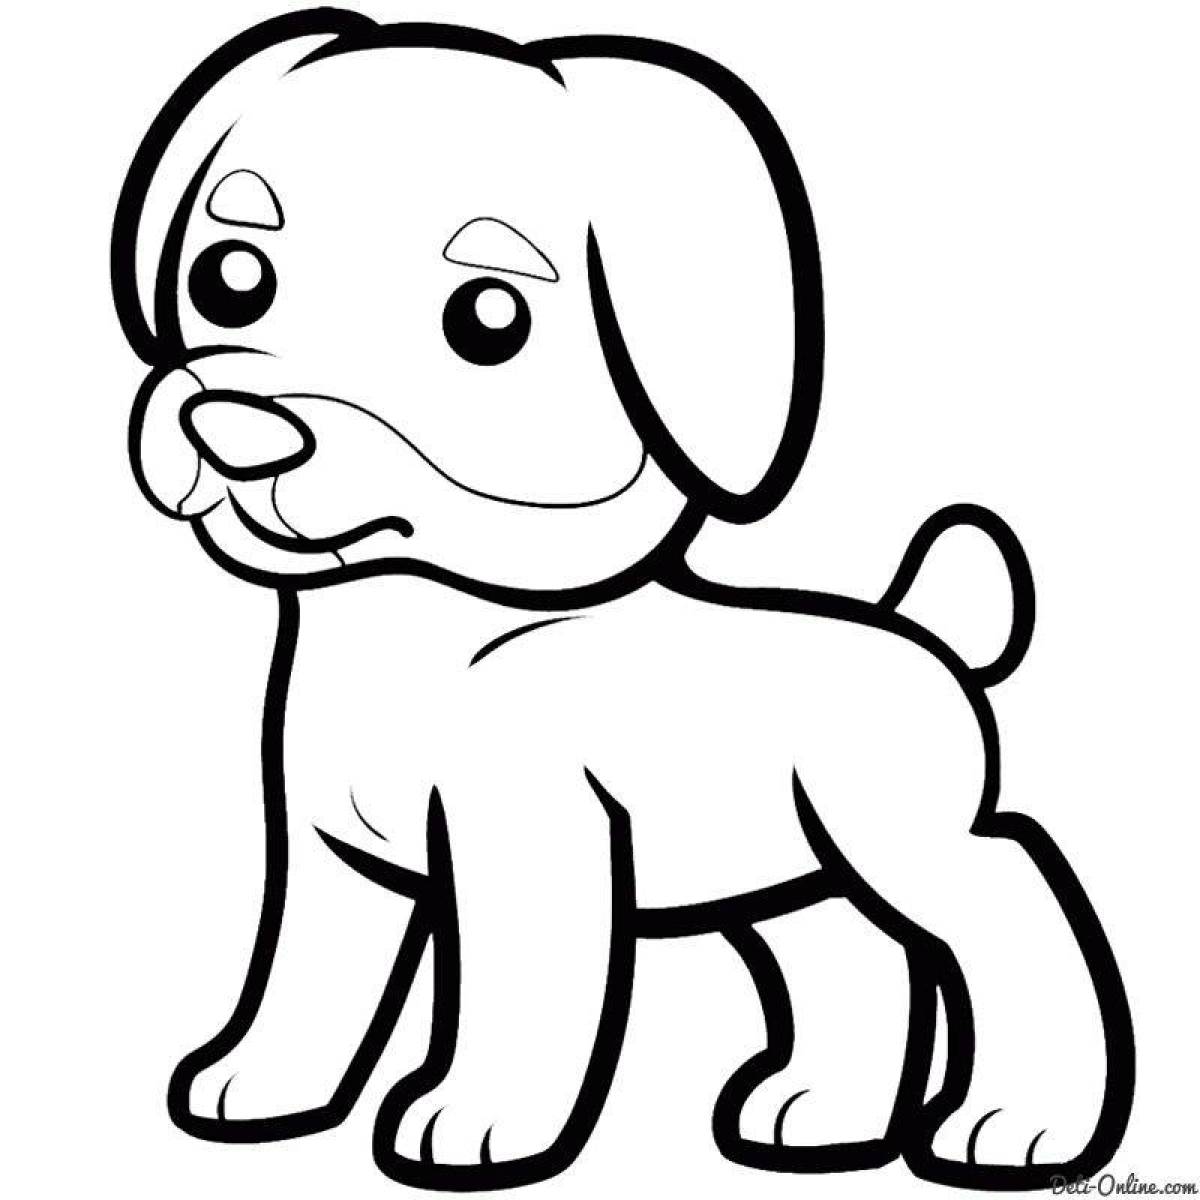 Dog-friendly coloring book